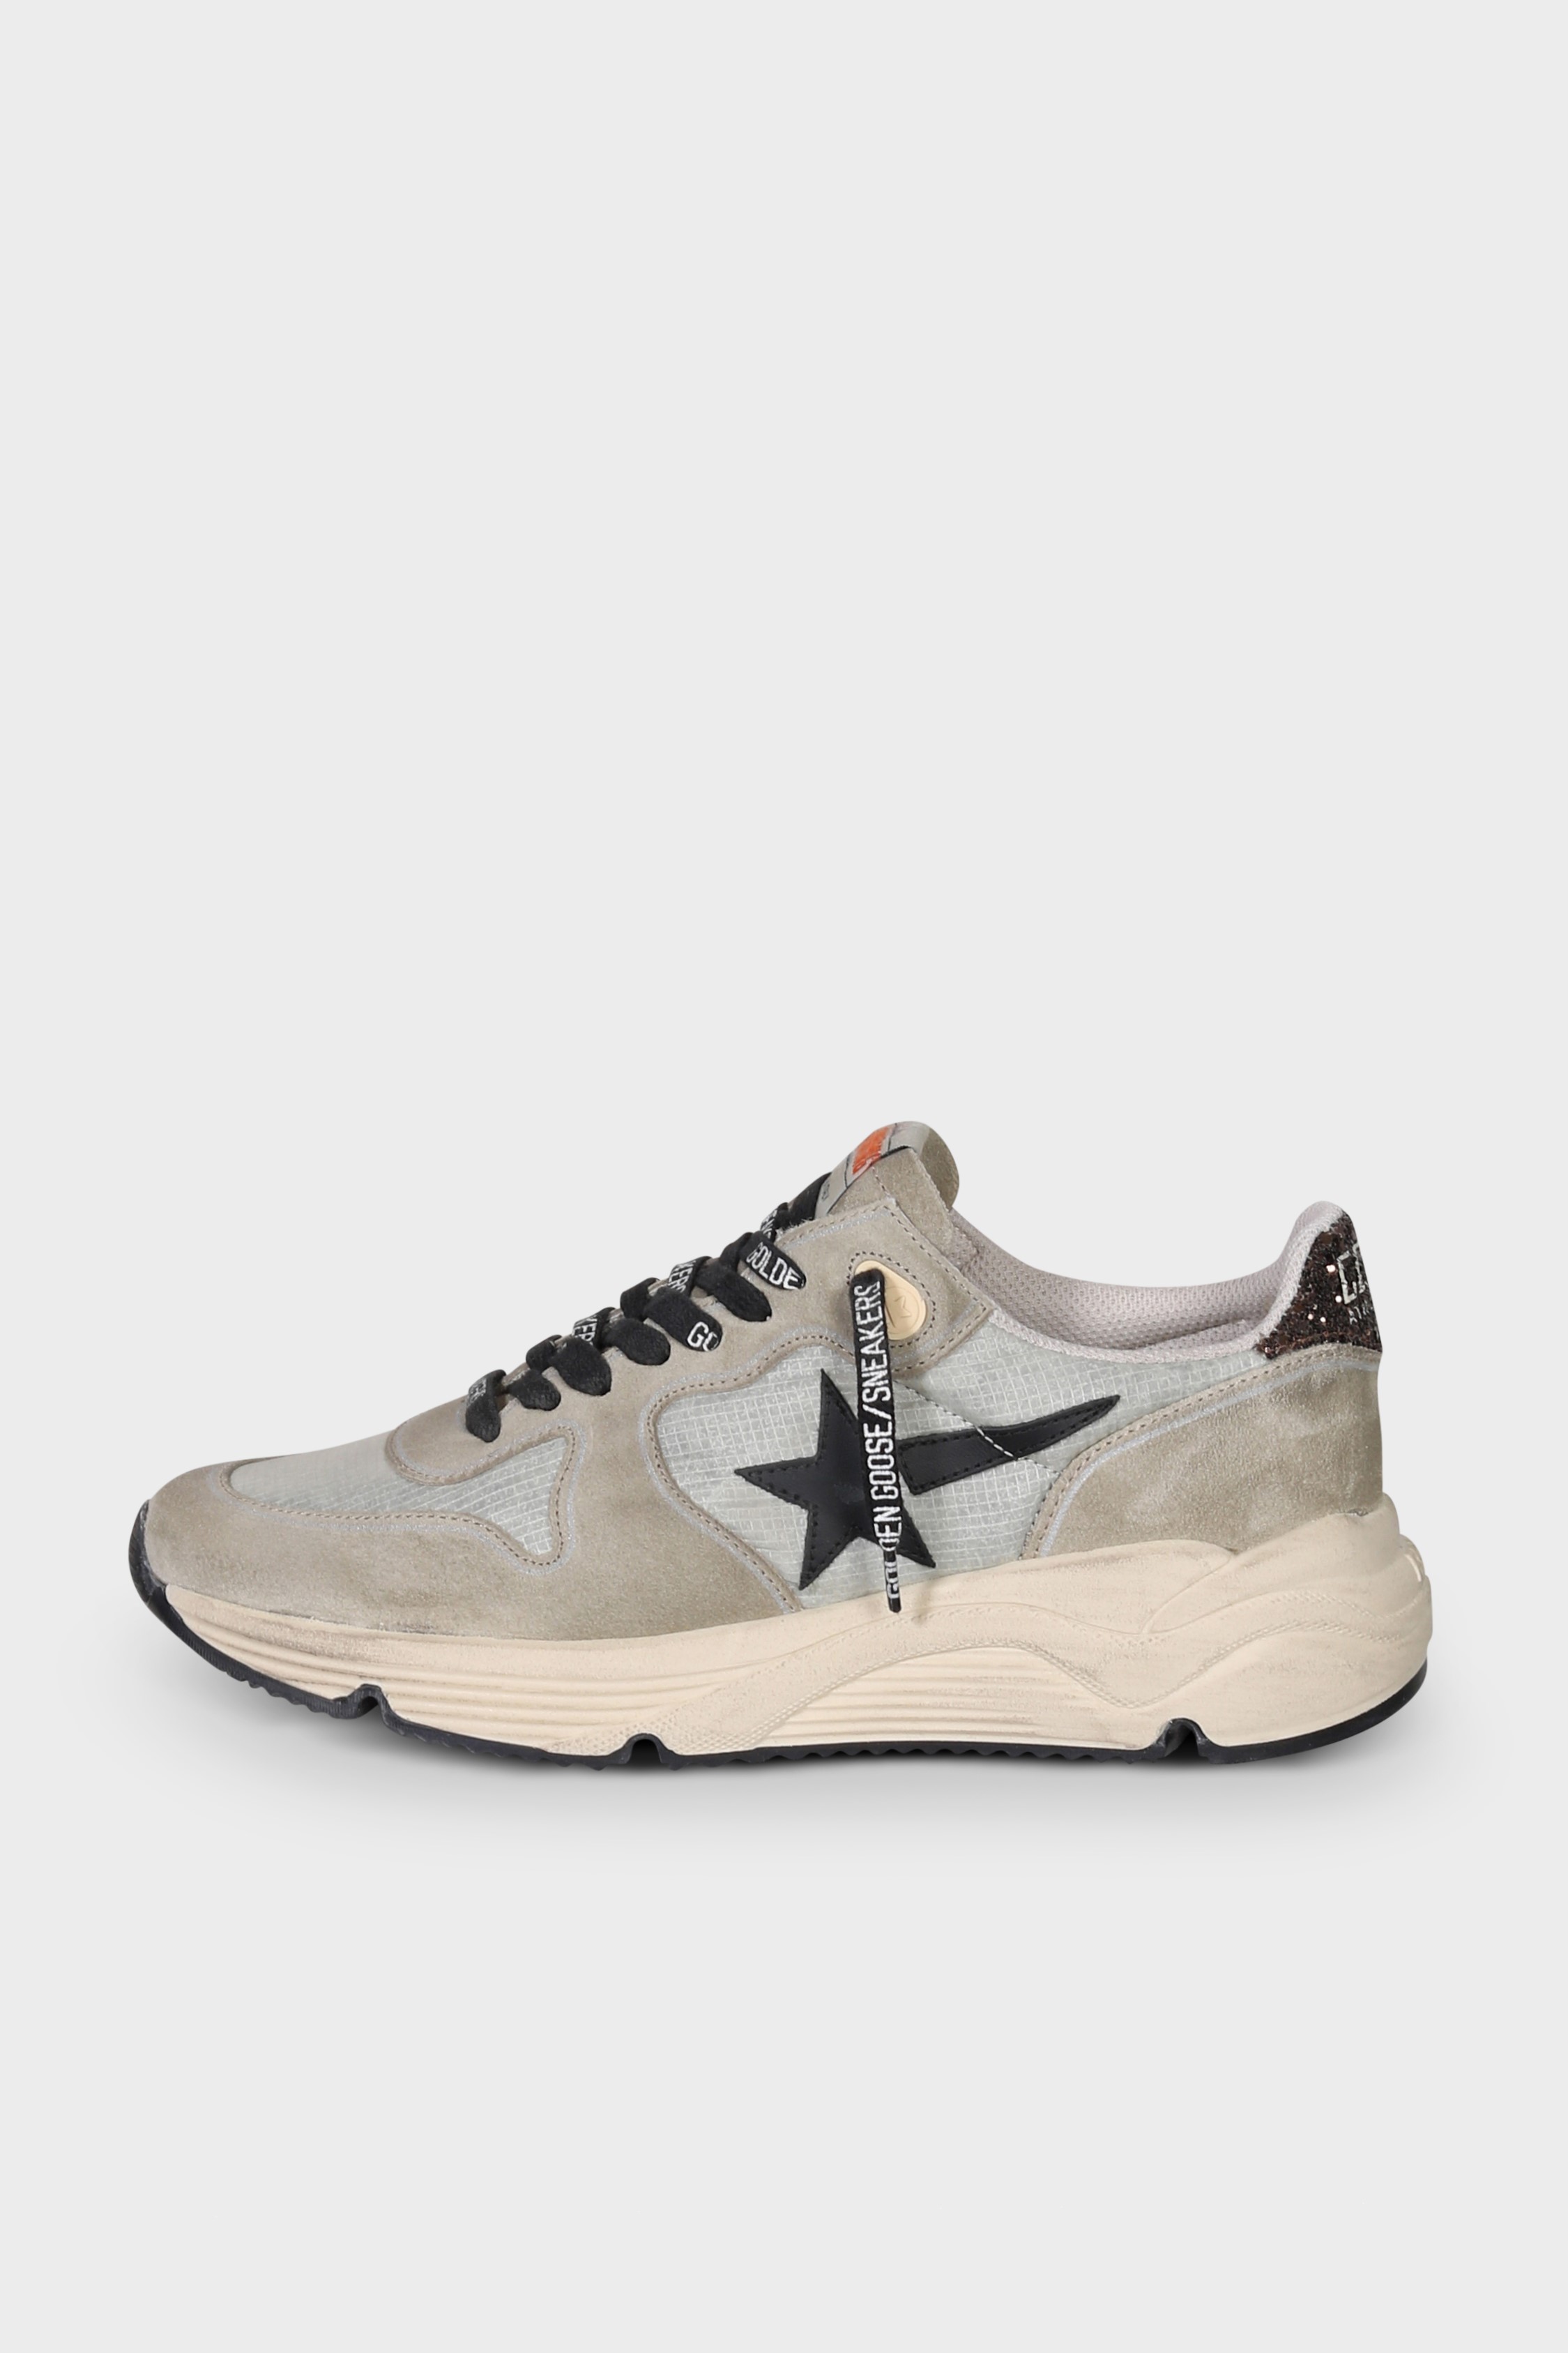 GOLDEN GOOSE Running Sole in Taupe/Brown